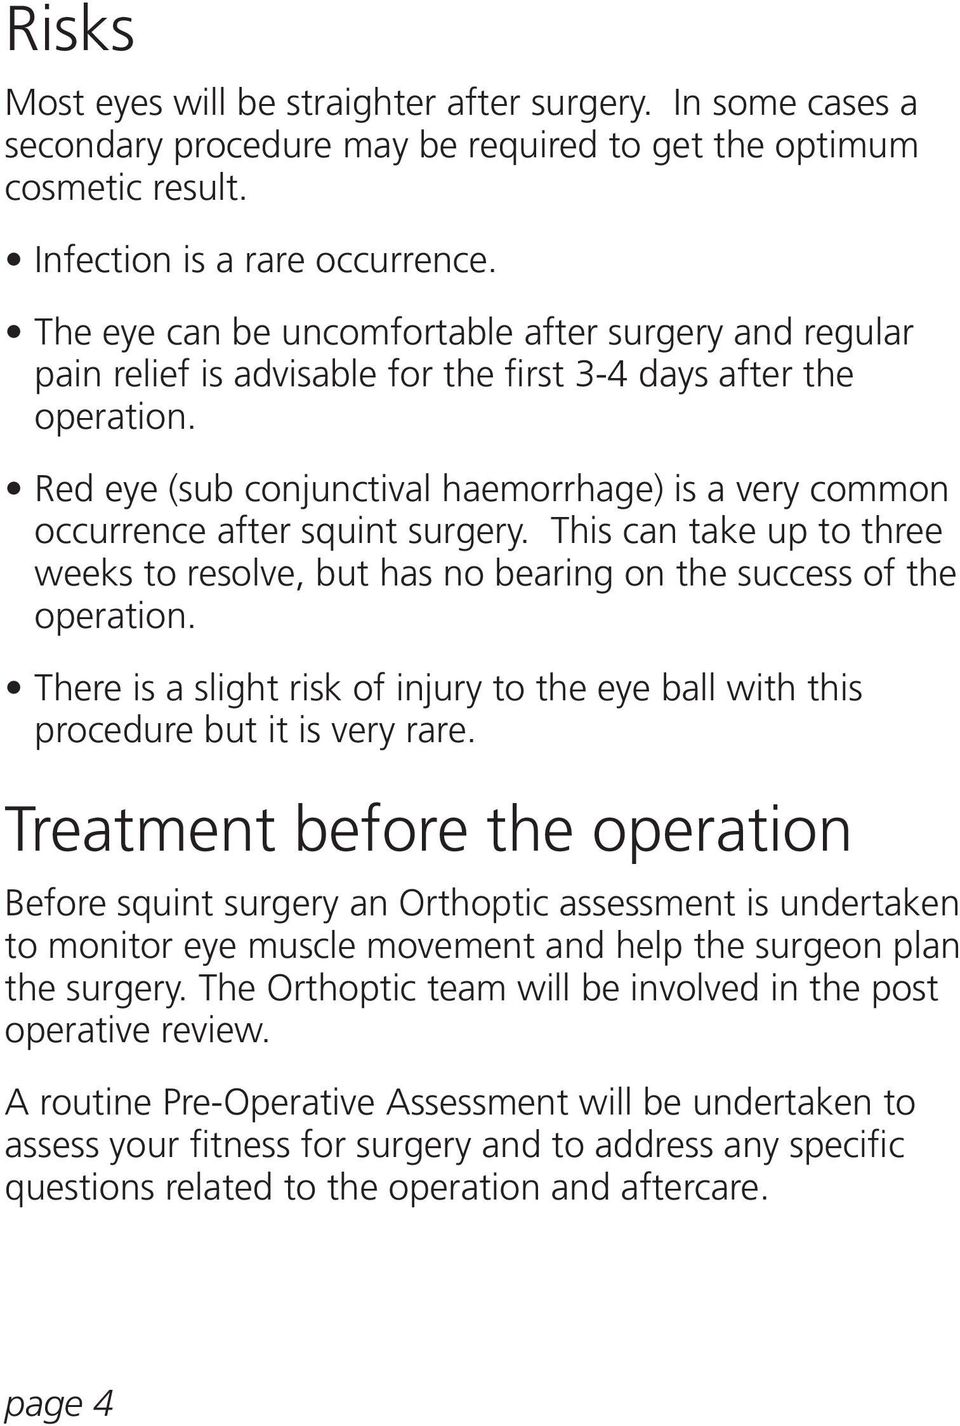 Red eye (sub conjunctival haemorrhage) is a very common occurrence after squint surgery. This can take up to three weeks to resolve, but has no bearing on the success of the operation.